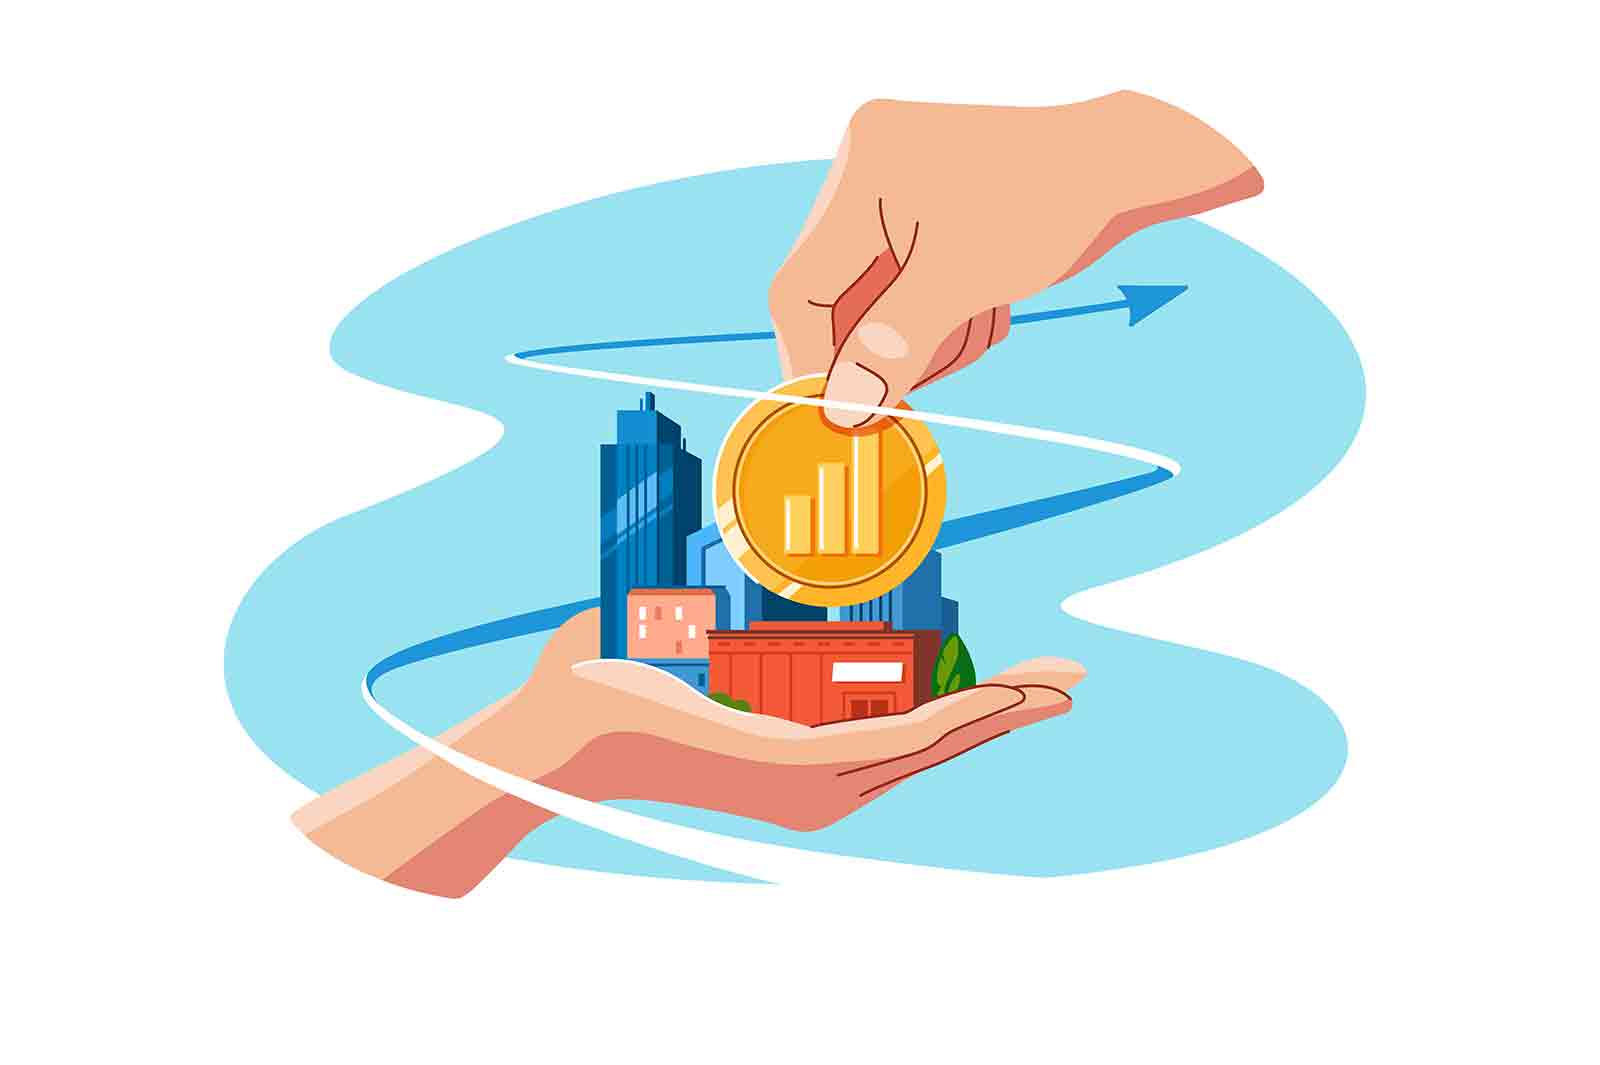 Hand holding coin symbol of investment in real estate vector illustration. Buy and rent accommodation flat style. Invest, property concept